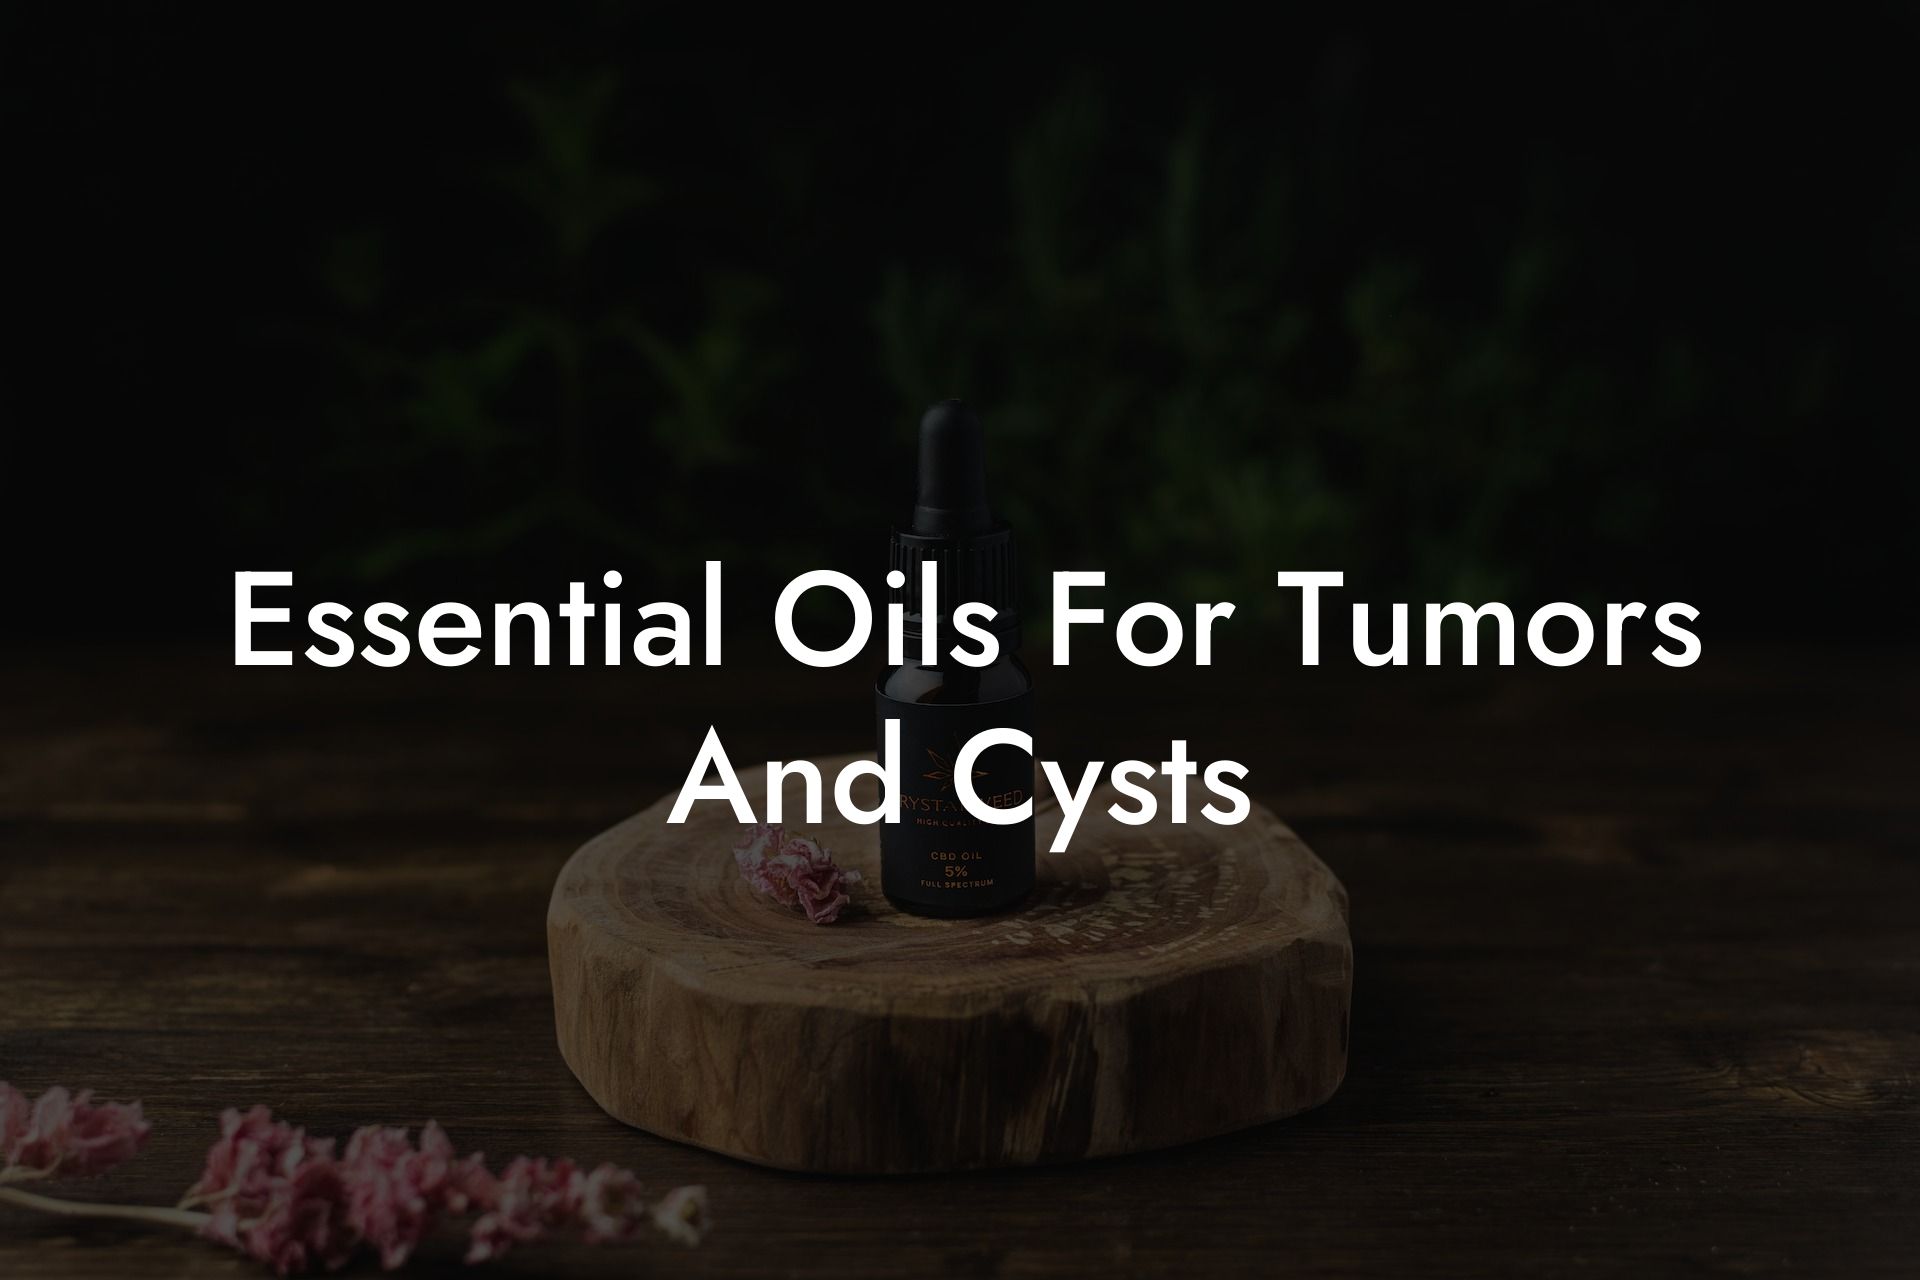 Essential Oils For Tumors And Cysts